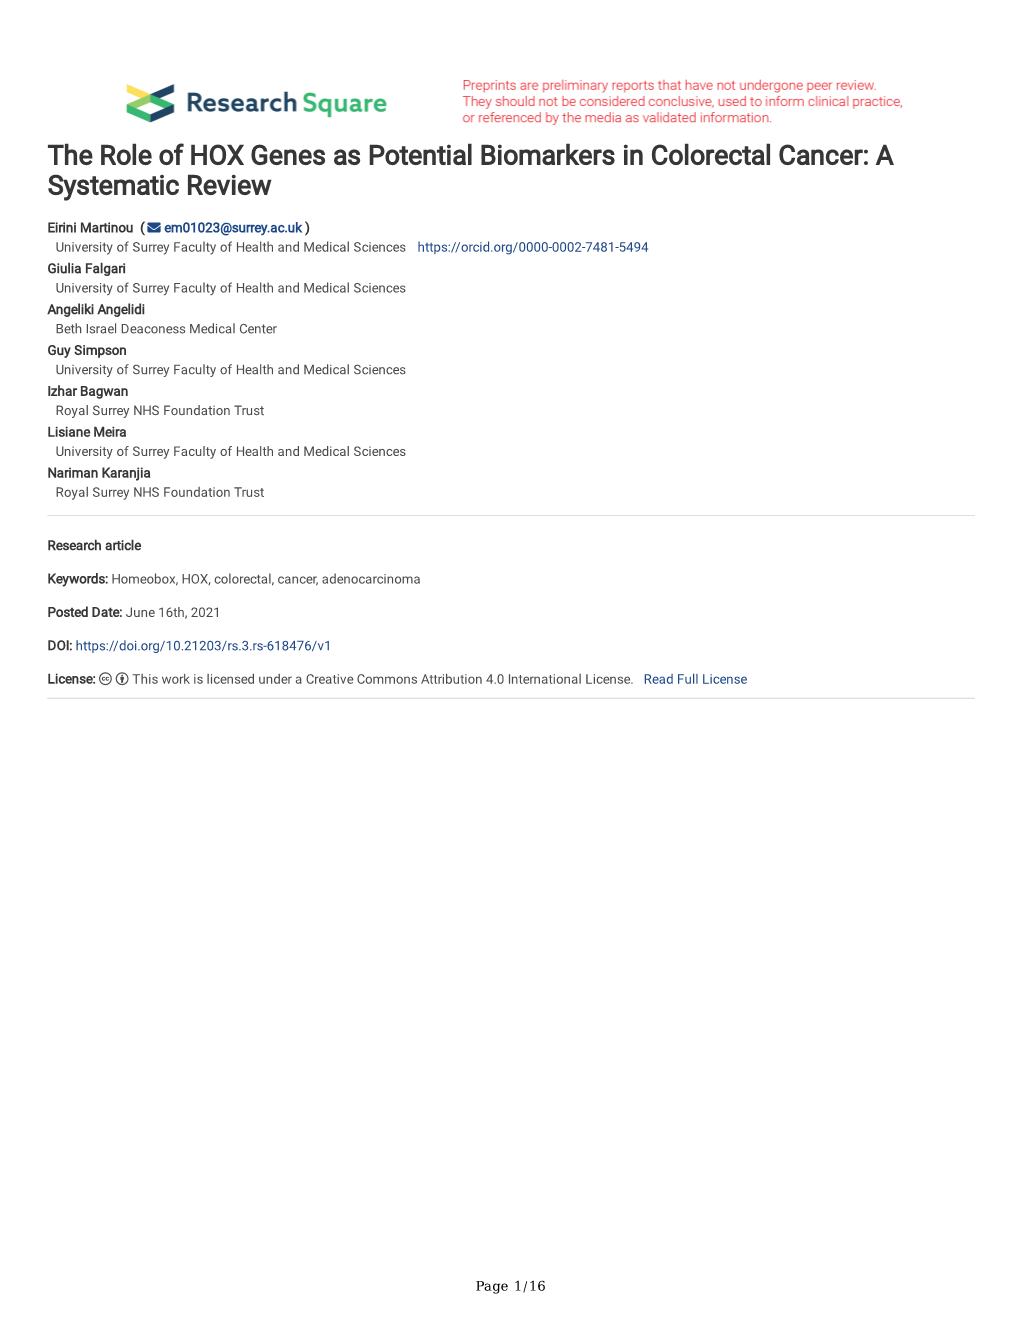 The Role of HOX Genes As Potential Biomarkers in Colorectal Cancer: a Systematic Review